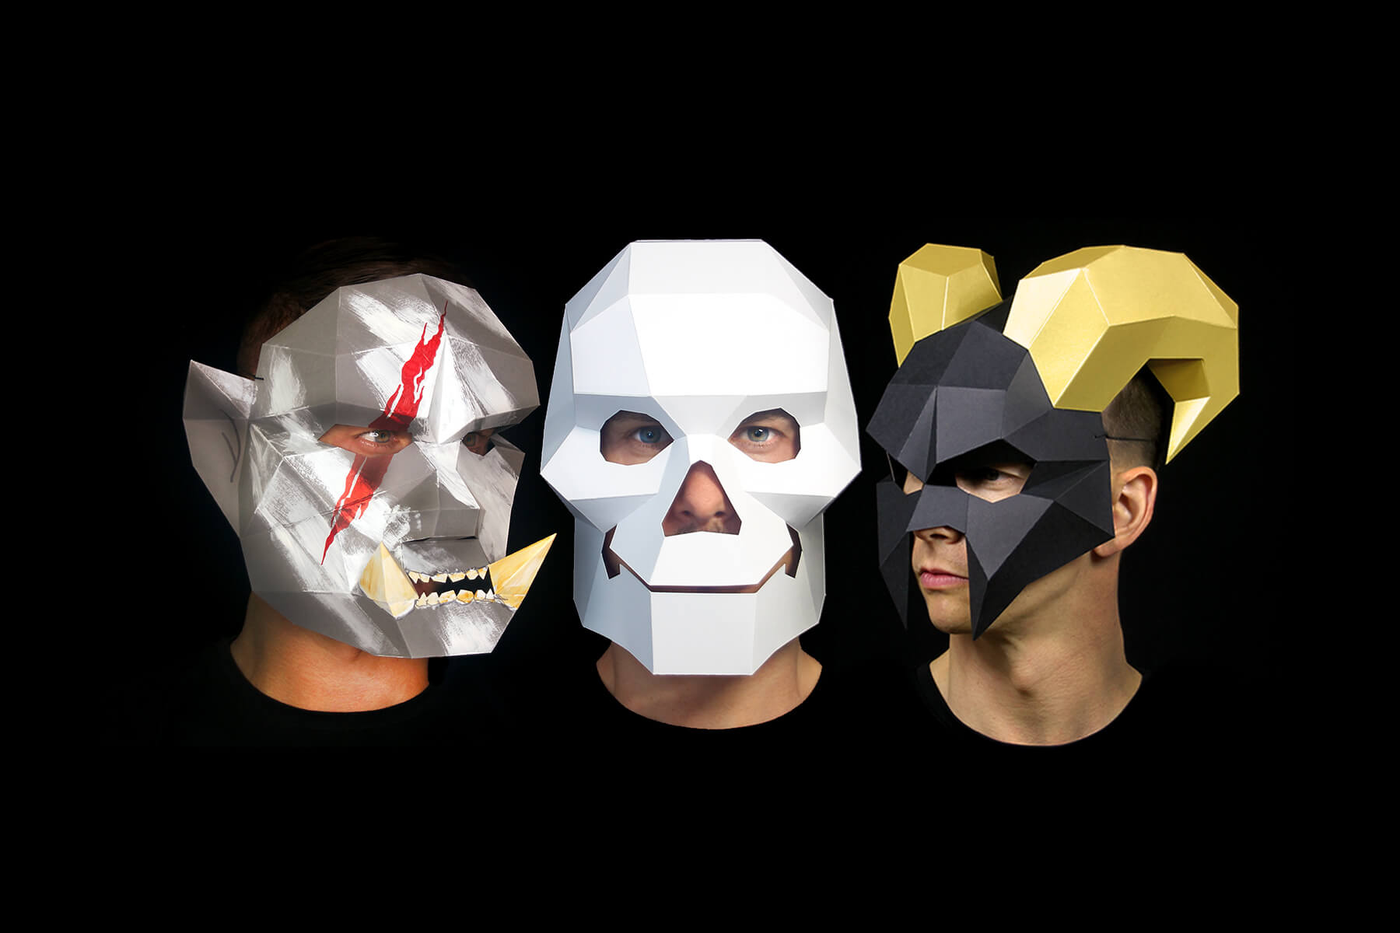 Halloween Papercraft Wintercroft Masks Templates made by you. Skull mask, Pumpkin King mask, Demon mask. Download the template and make your own DIY paper low-poly geometric paper masks for Halloween. Designed by Ntanos